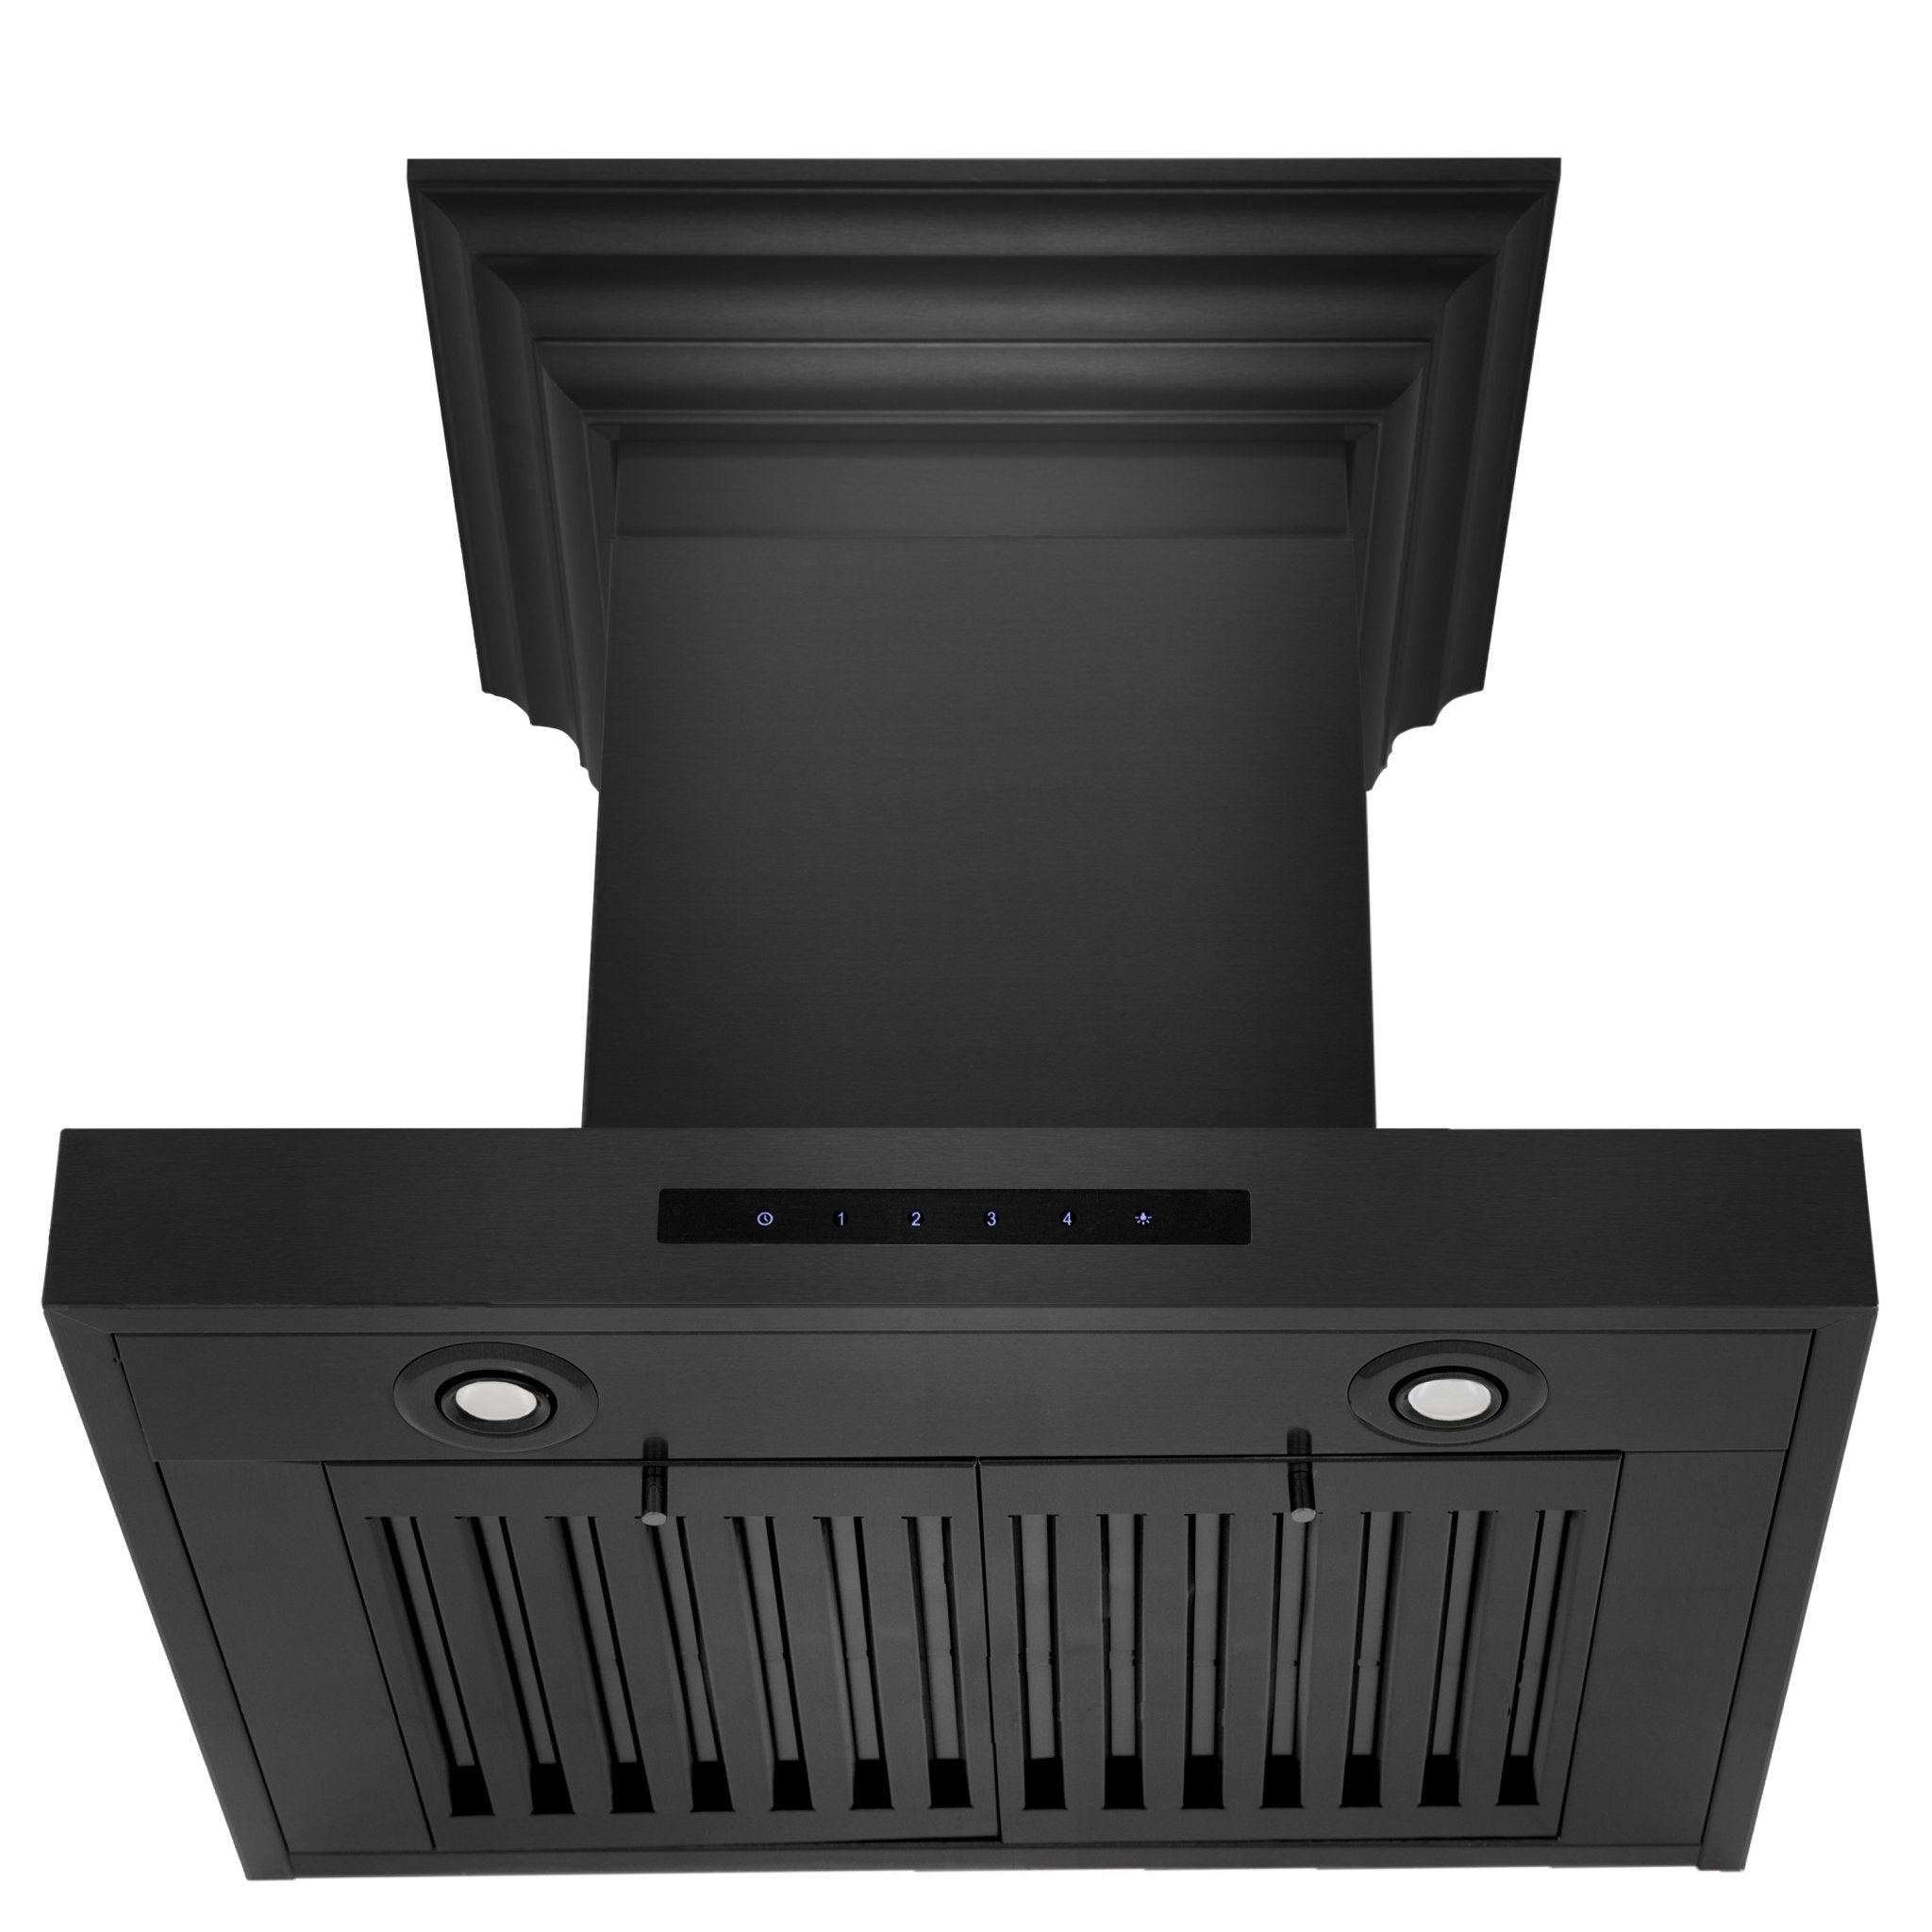 ZLINE Convertible Vent Wall Mount Range Hood in Black Stainless Steel with Crown Molding (BSKENCRN) front under showing baffle filters and LED lighting.